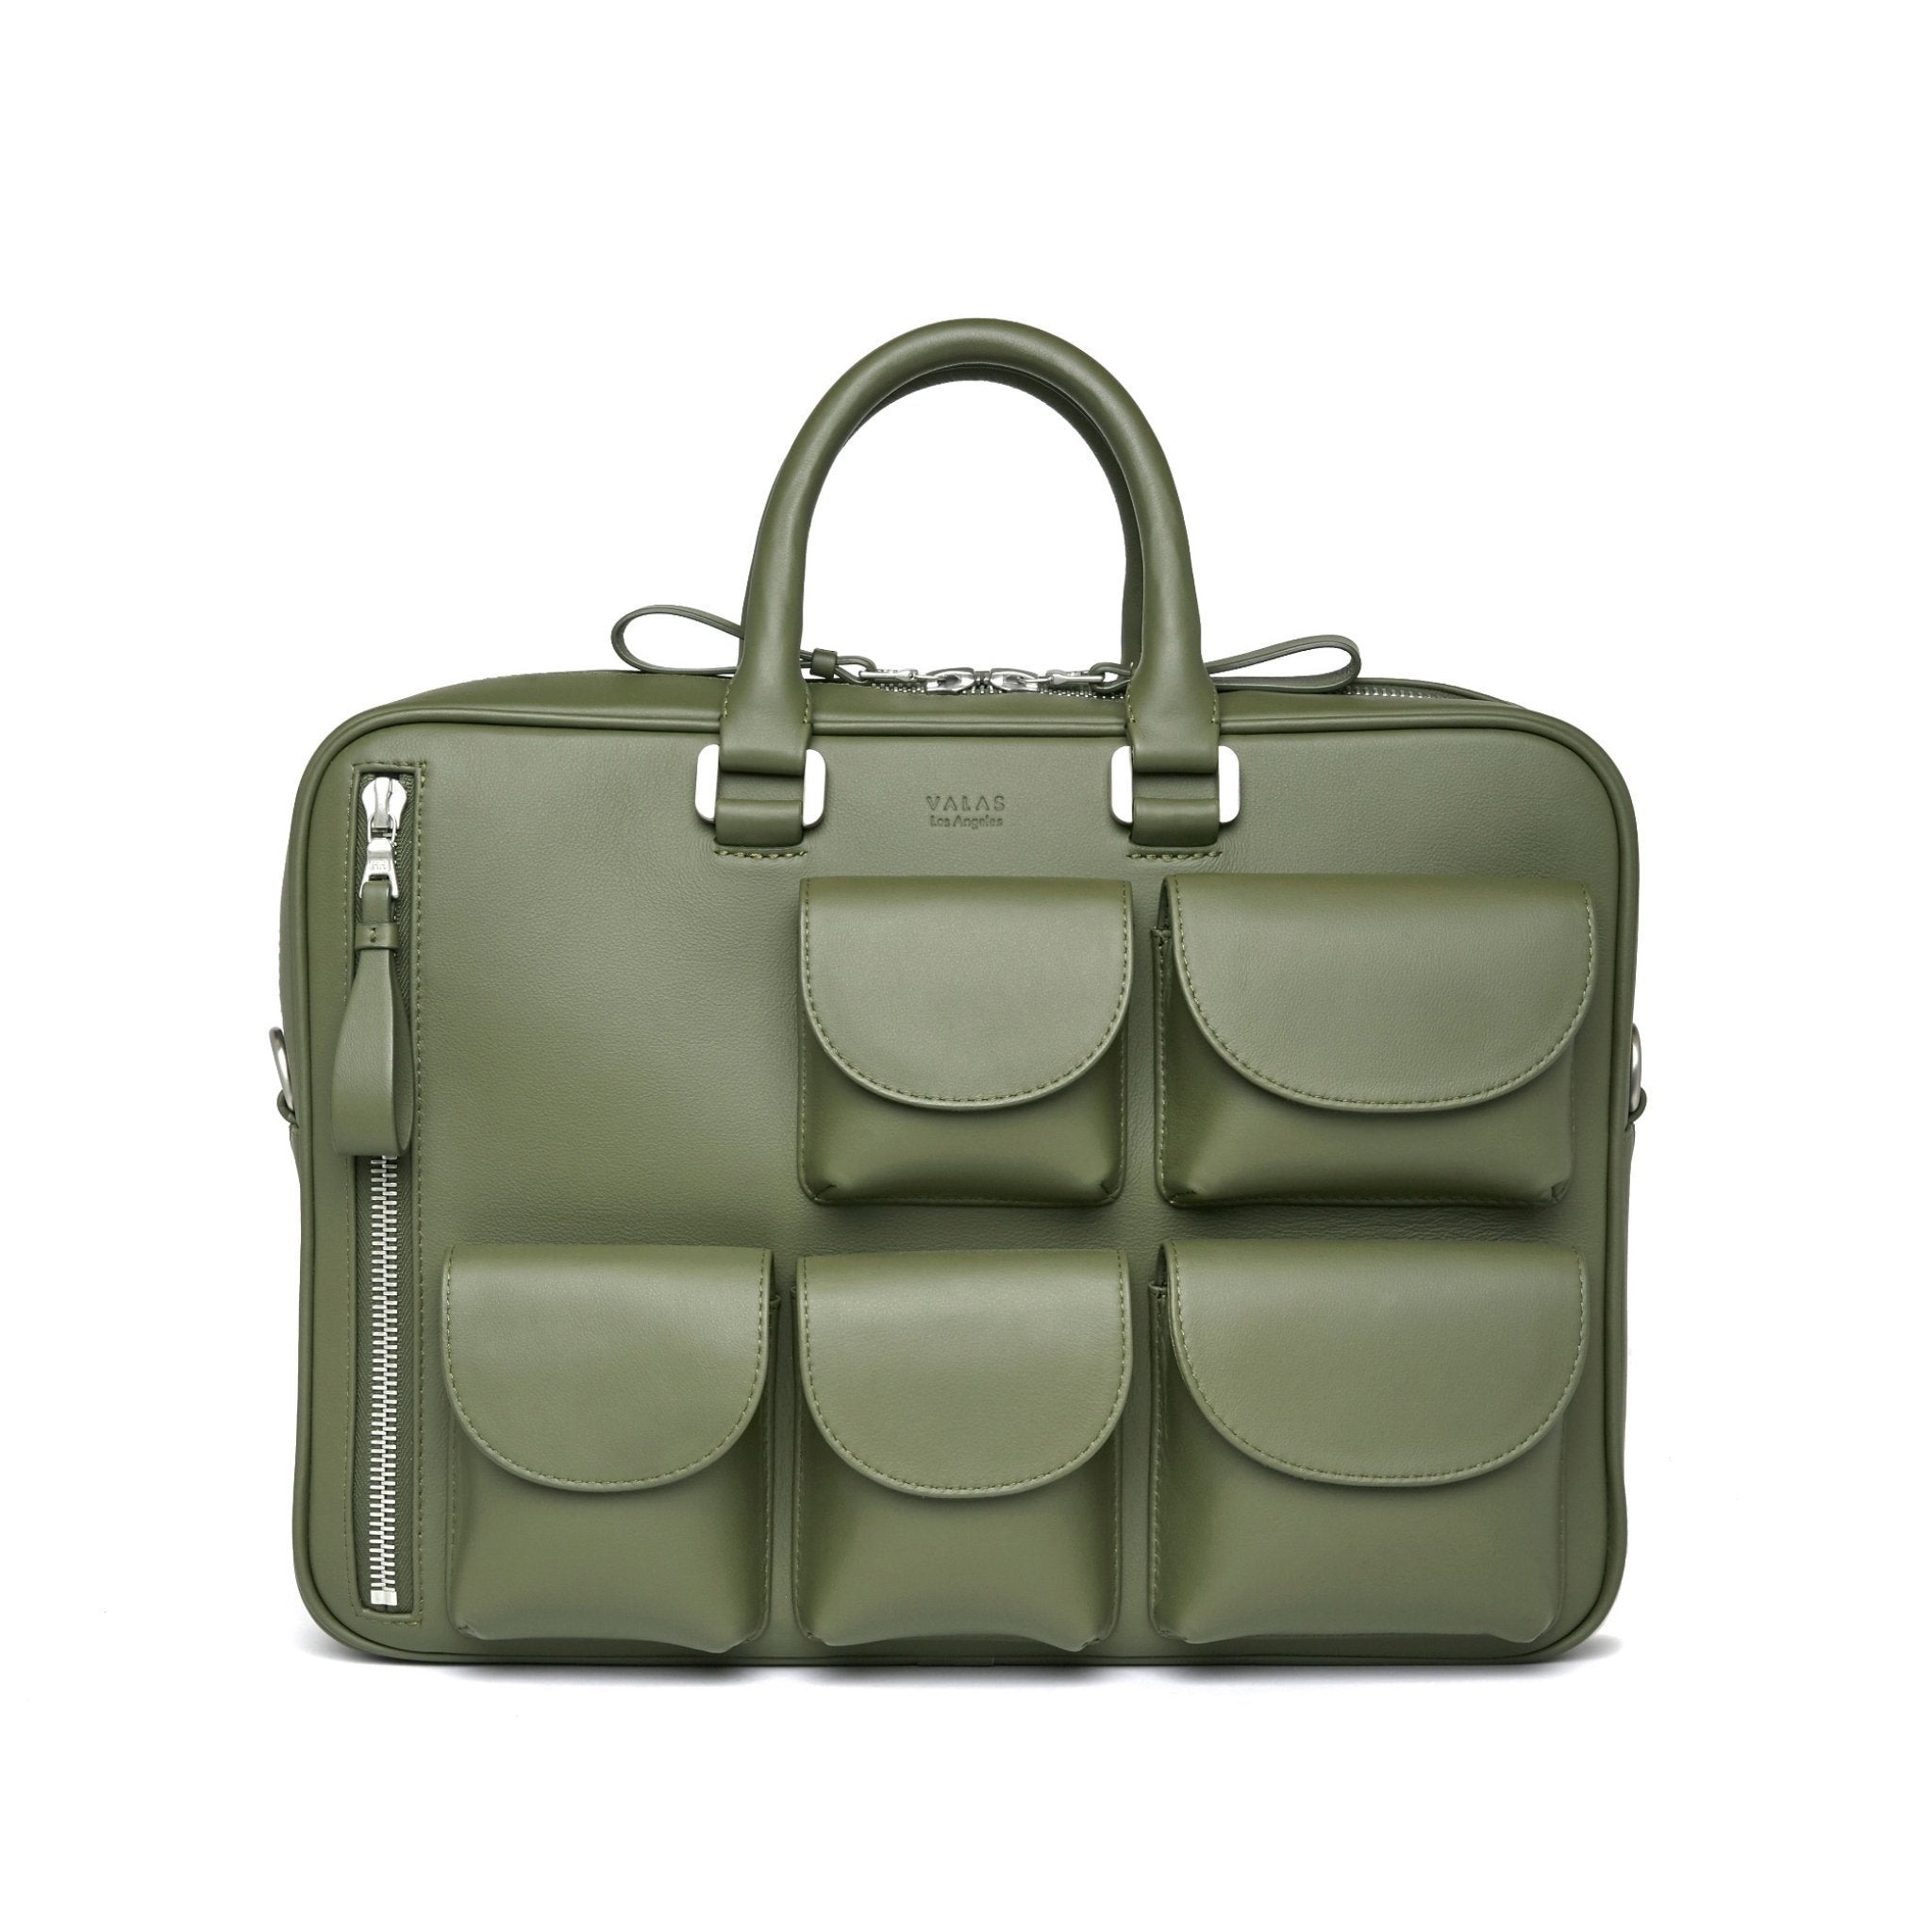 Valas Explore Bag in Olive with outside pockets on Well(un)known Available at wellunknown.com